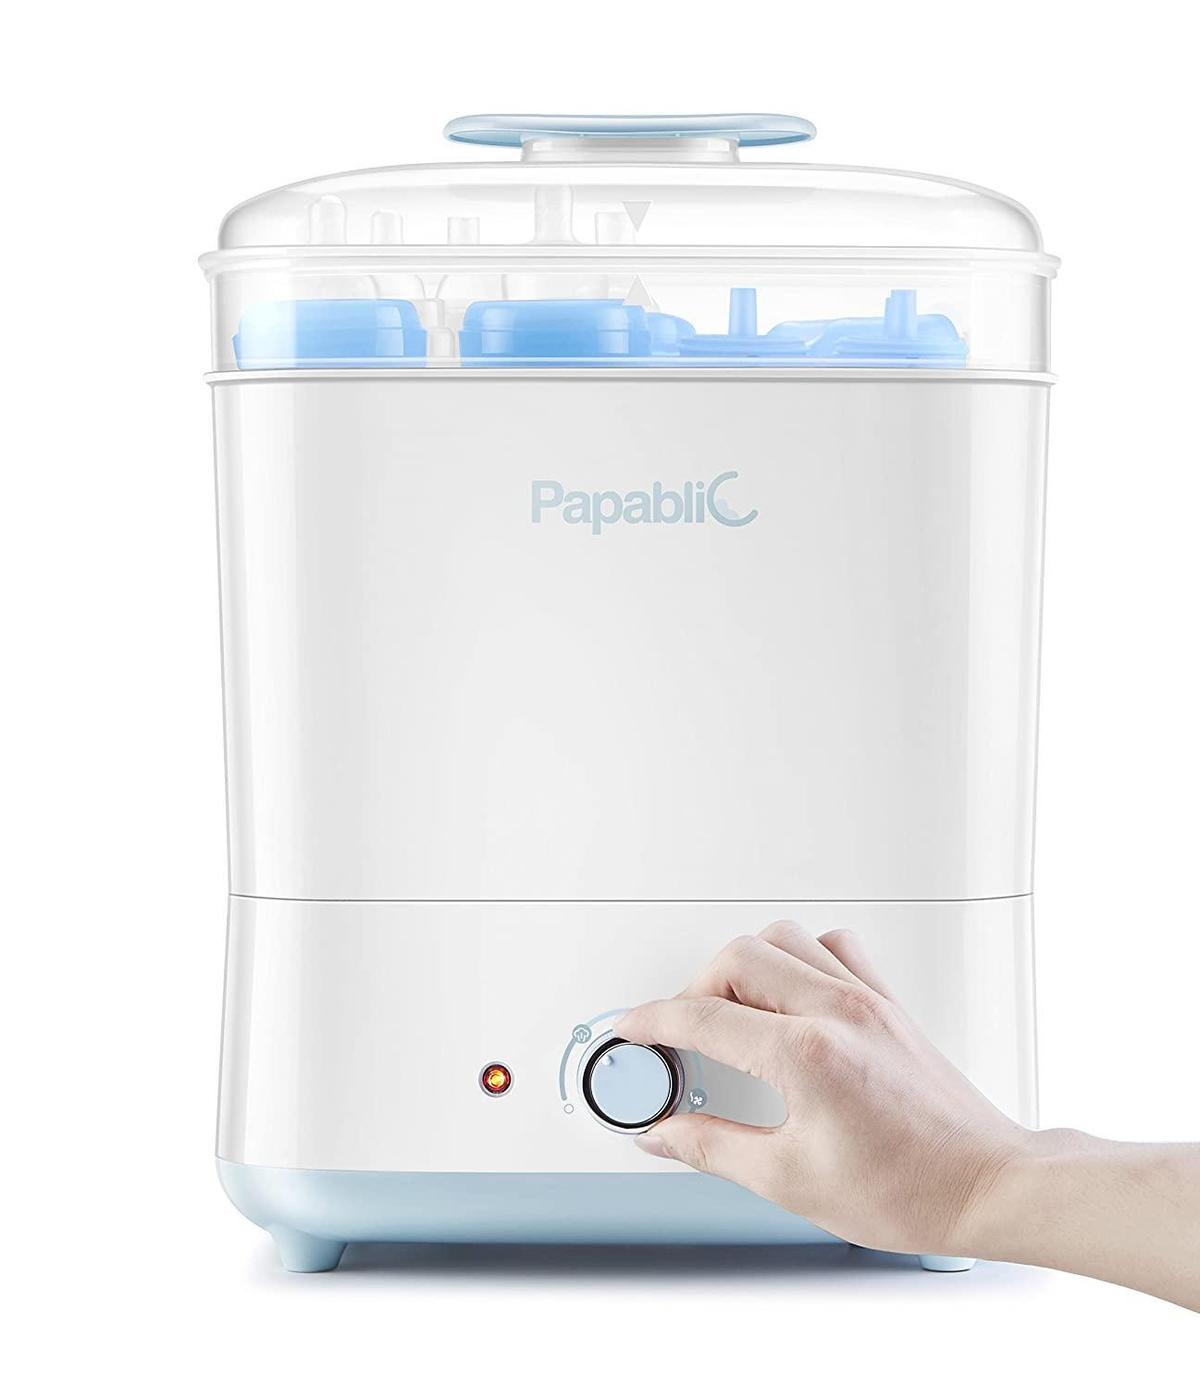 Papablic Baby Bottle Electric Steam Sterilizer and Dryer $69.95 MSRP